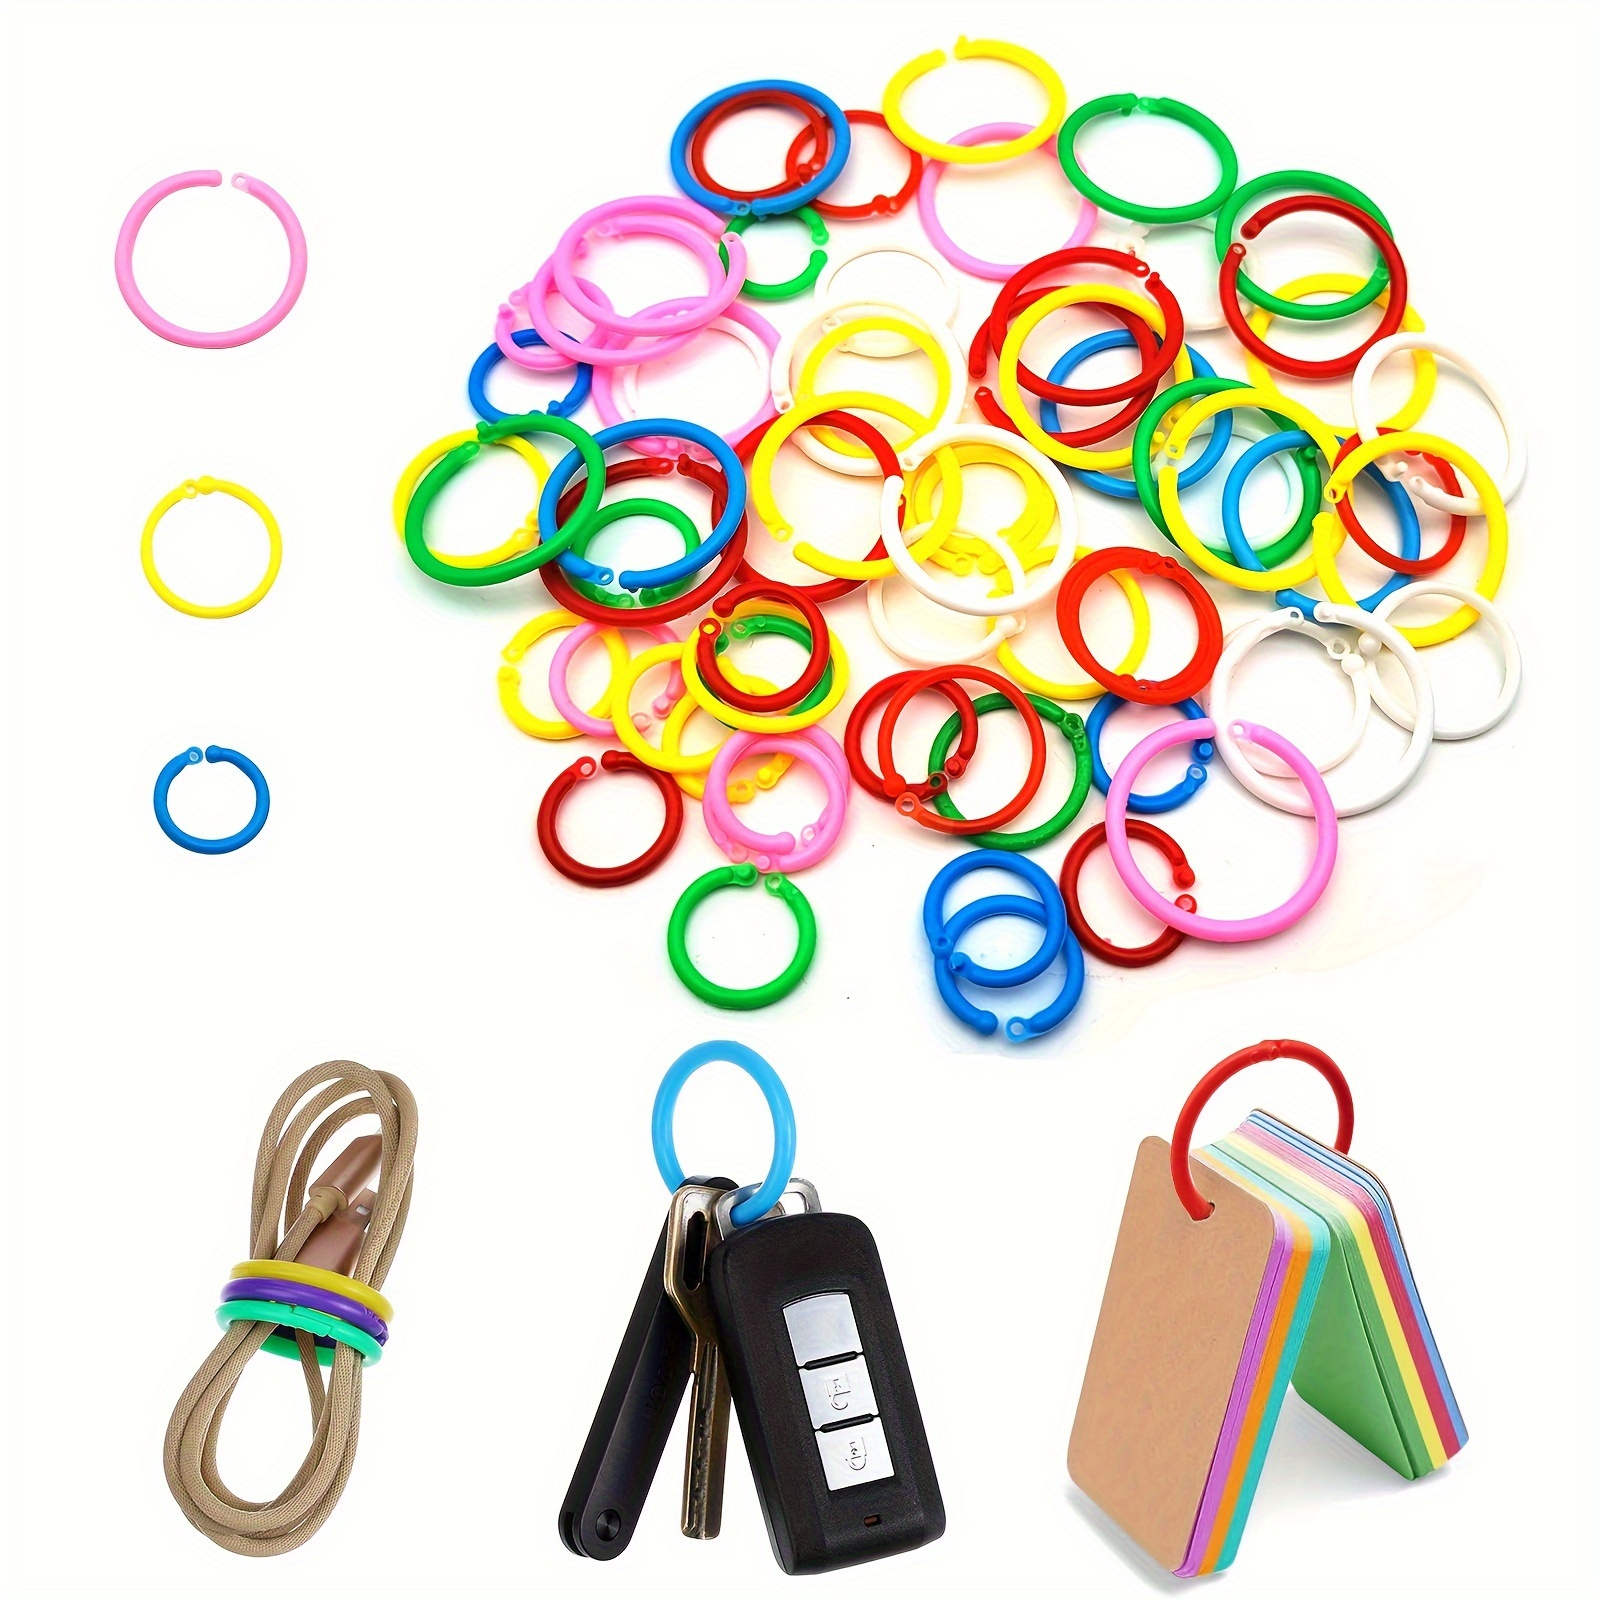 

50-piece Multi-color Plastic Binder Rings - Flexible Loose Leaf Book Rings For Card, Document & Organization - Ideal For School, Home, Or Office Use